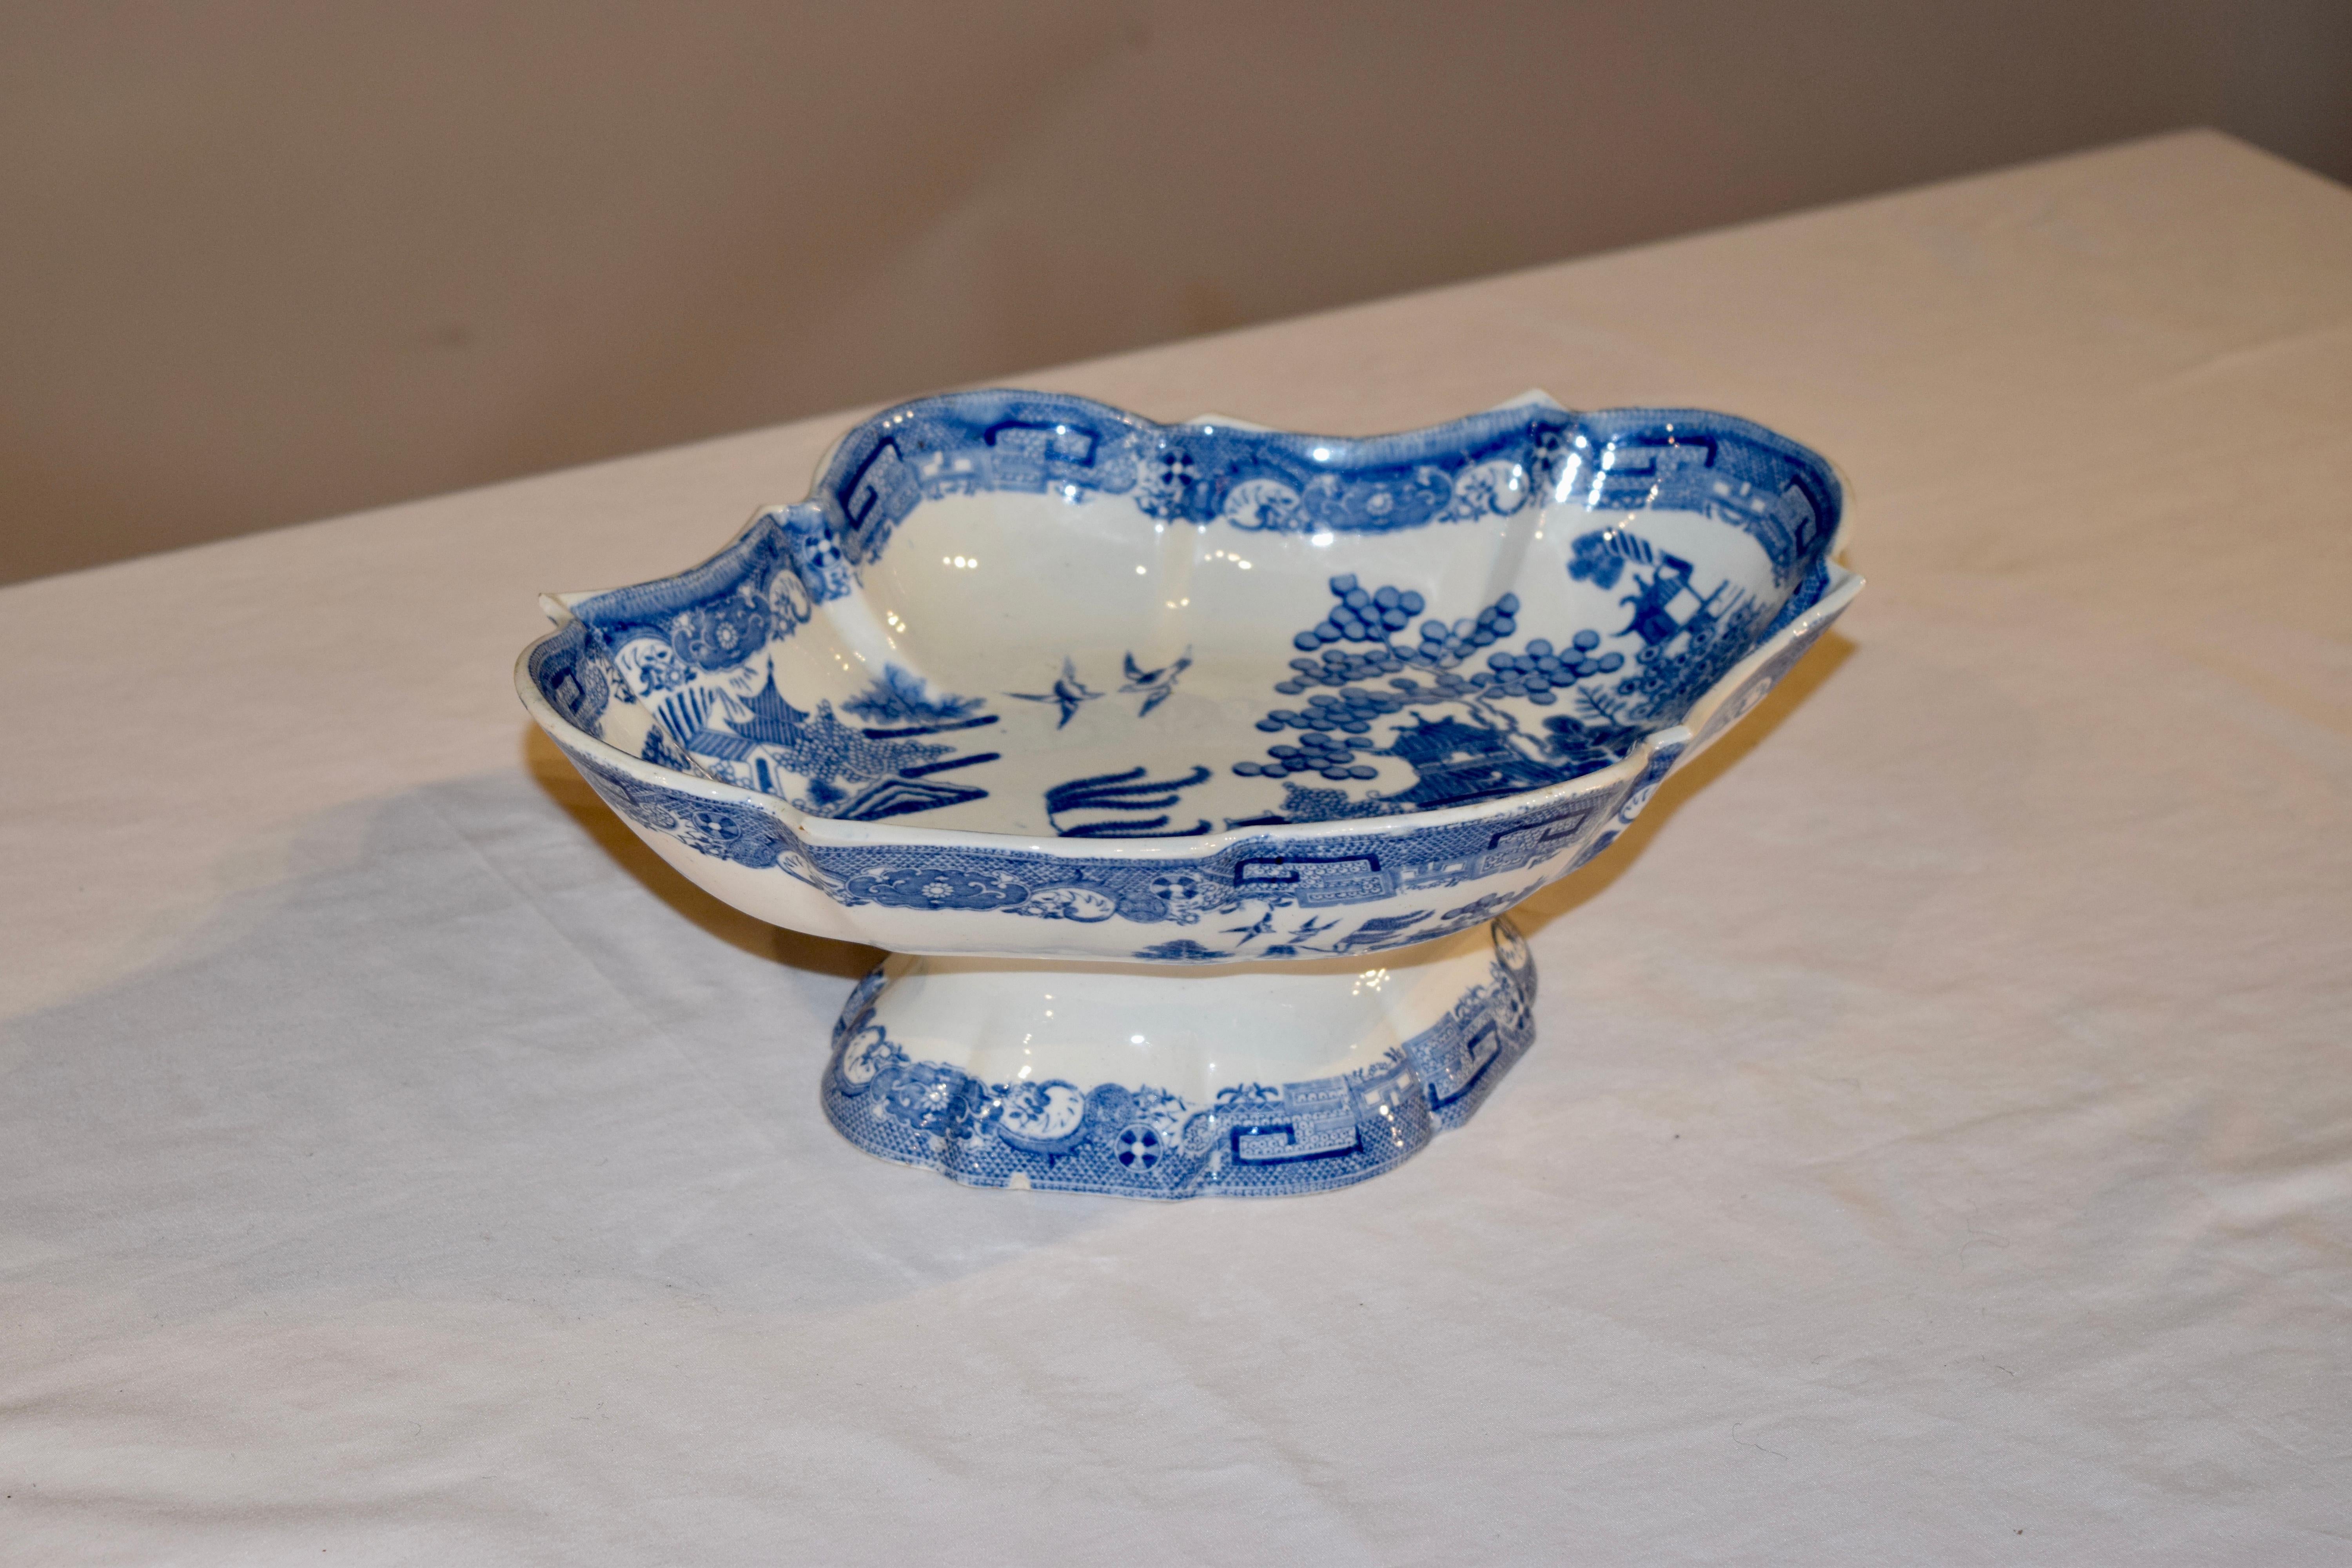 19th century footed porcelain bowl from England. It is a wonderfully scalloped form and is decorated in the highly collectable 